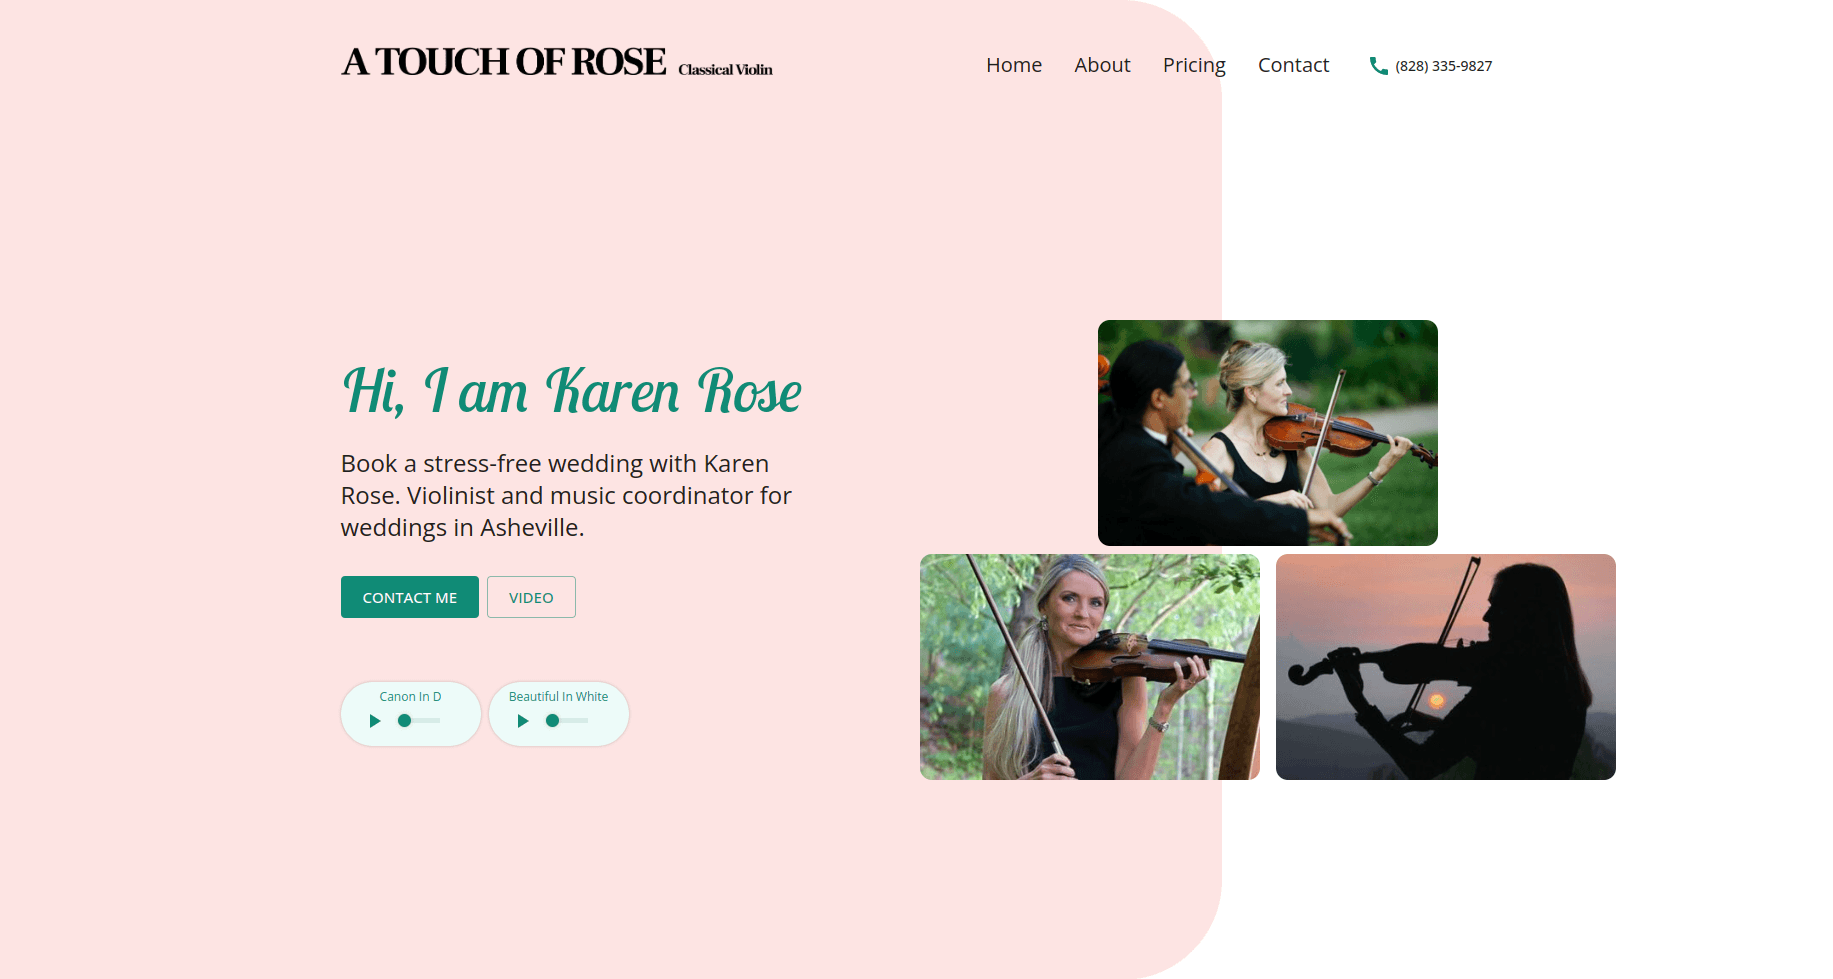 Asheville Wedding Musicians - A Touch Of Rose 2022-10-17 10-19-30.png